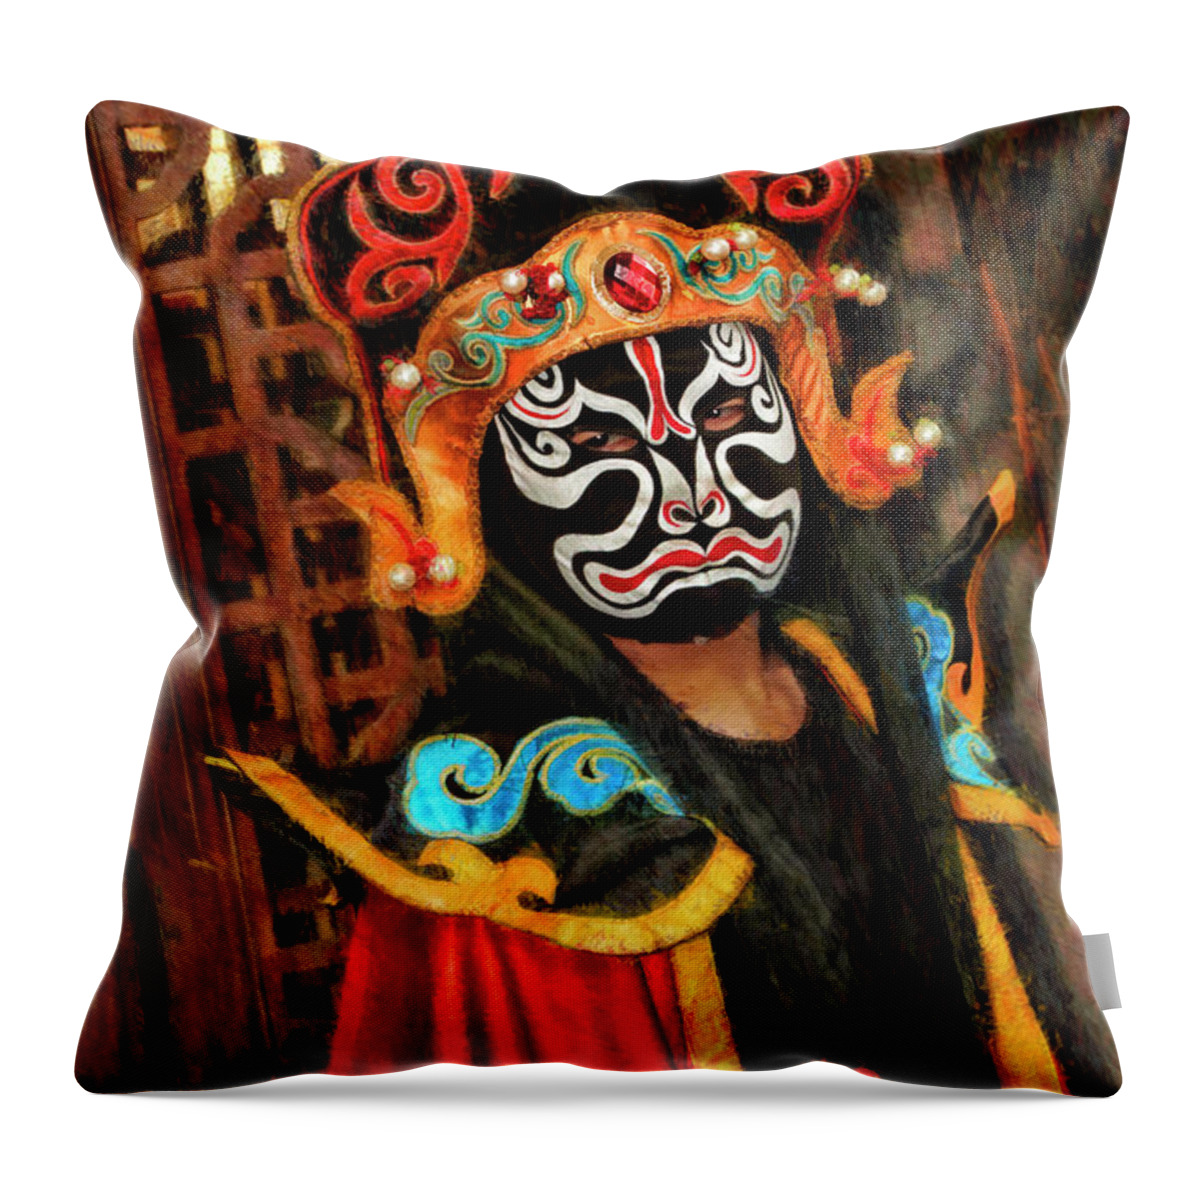  Throw Pillow featuring the photograph Ancient Traditions Sichuan Opera by Blake Richards